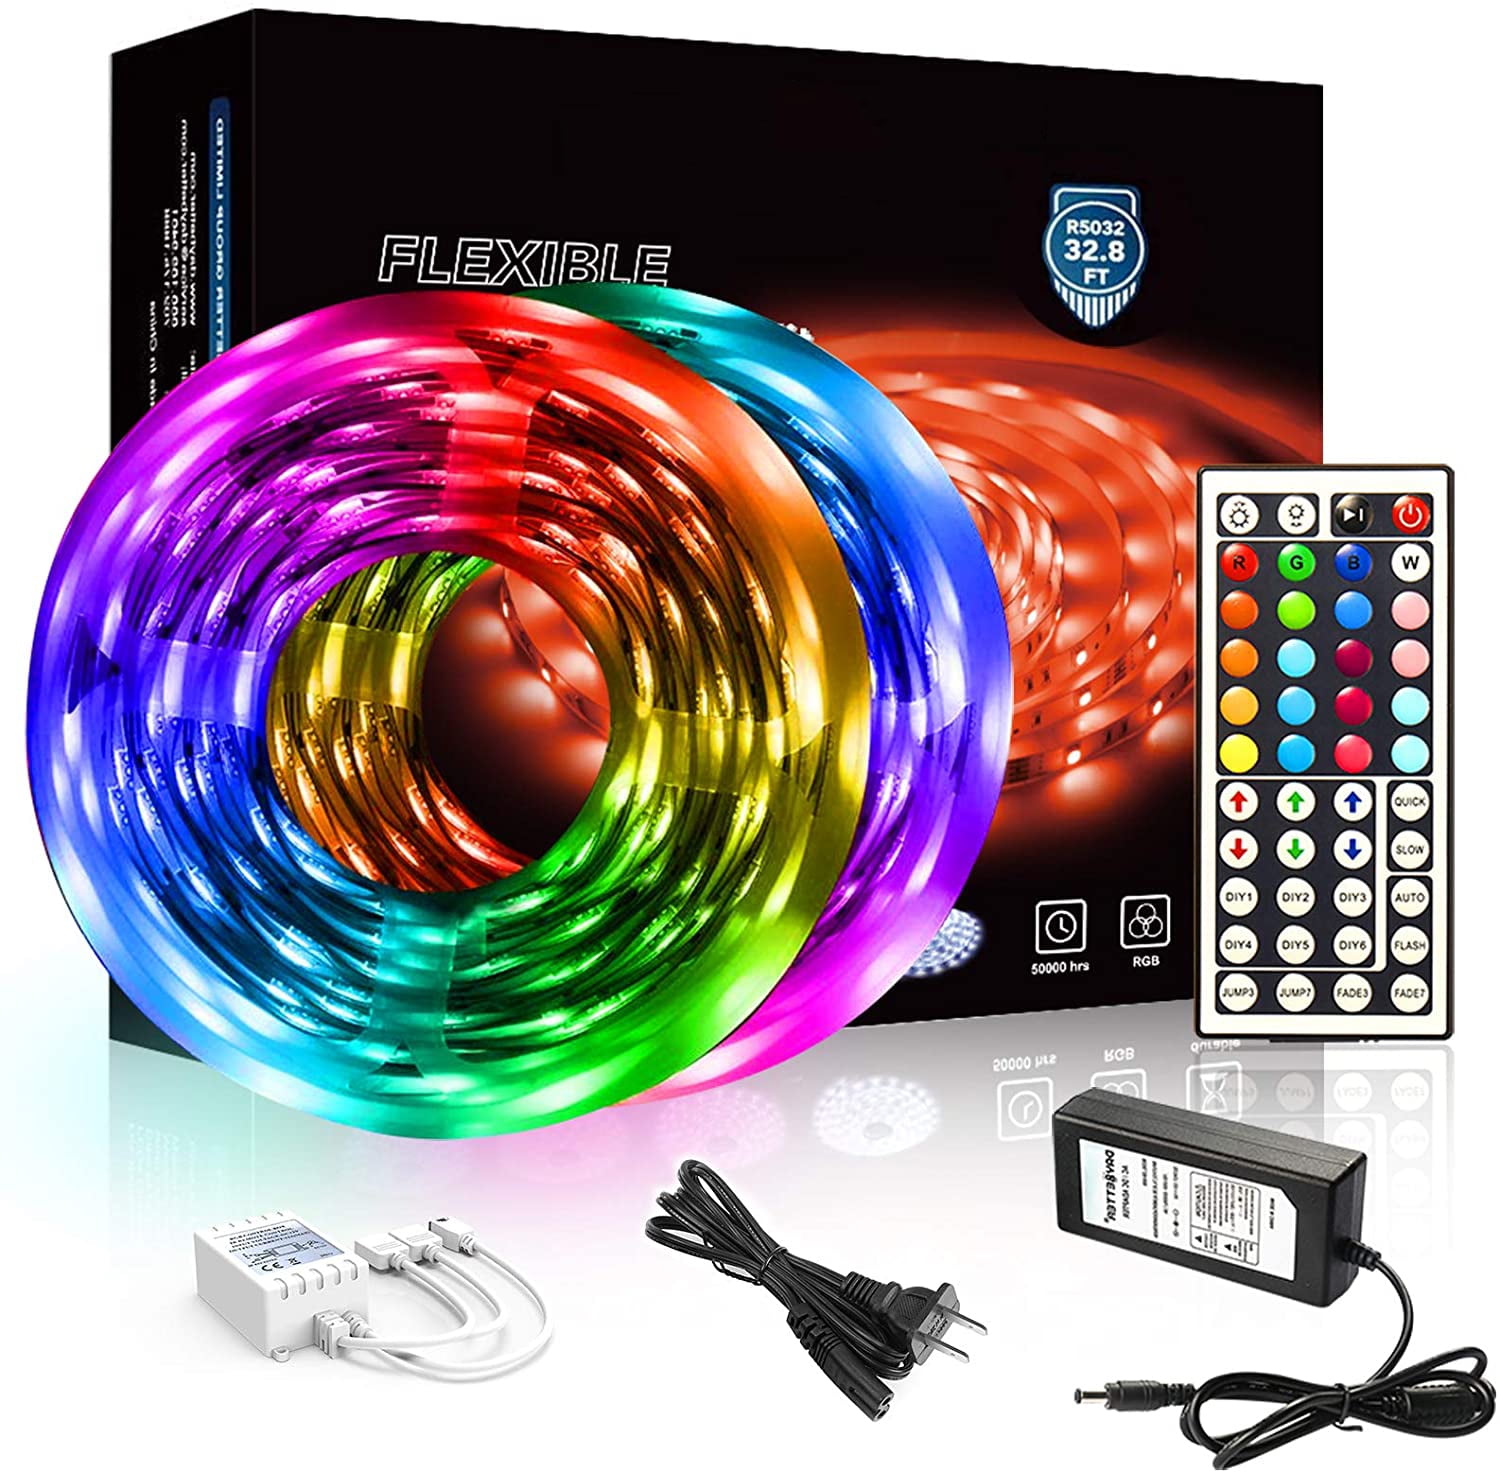 Details about   Flexible 5050 LED Strip Light 32.8FT Color Changing for Bedroom Kitchen Party 